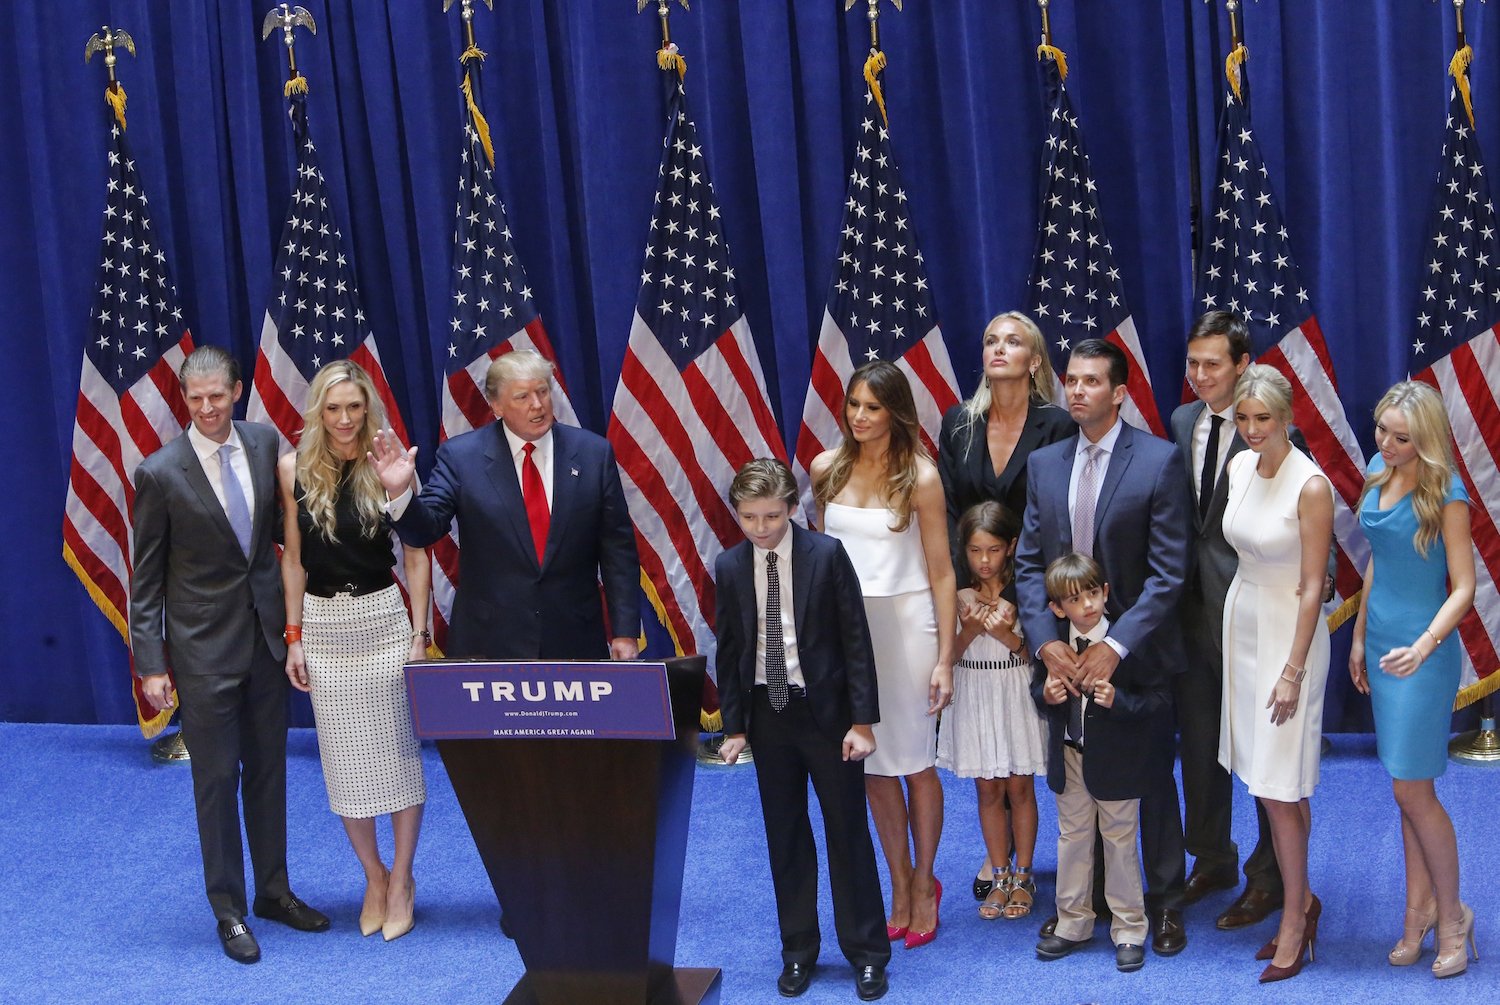 Trump's family at his campaign announcement